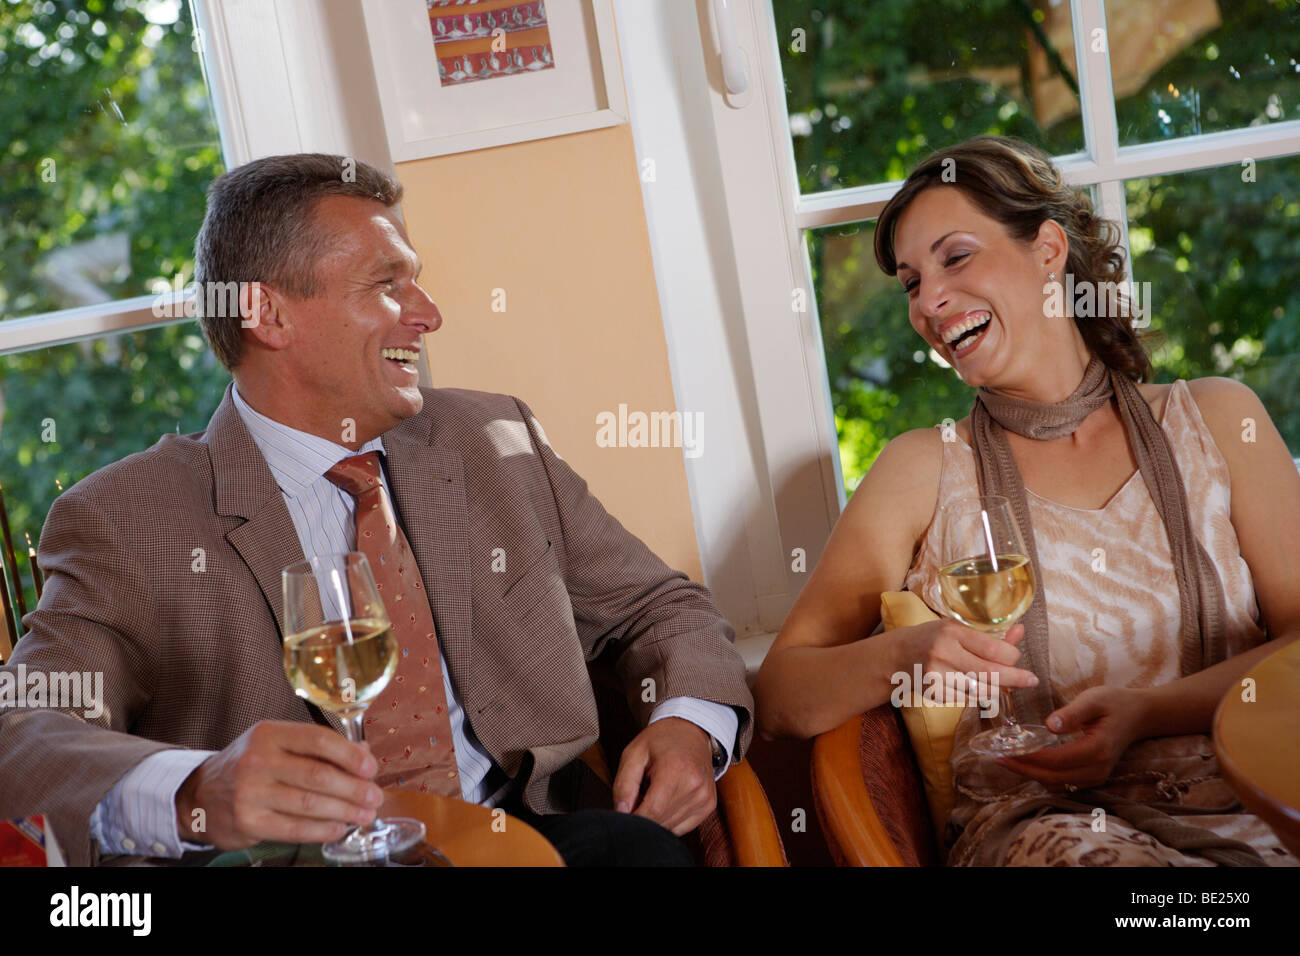 Couple holding a wine glass Banque D'Images